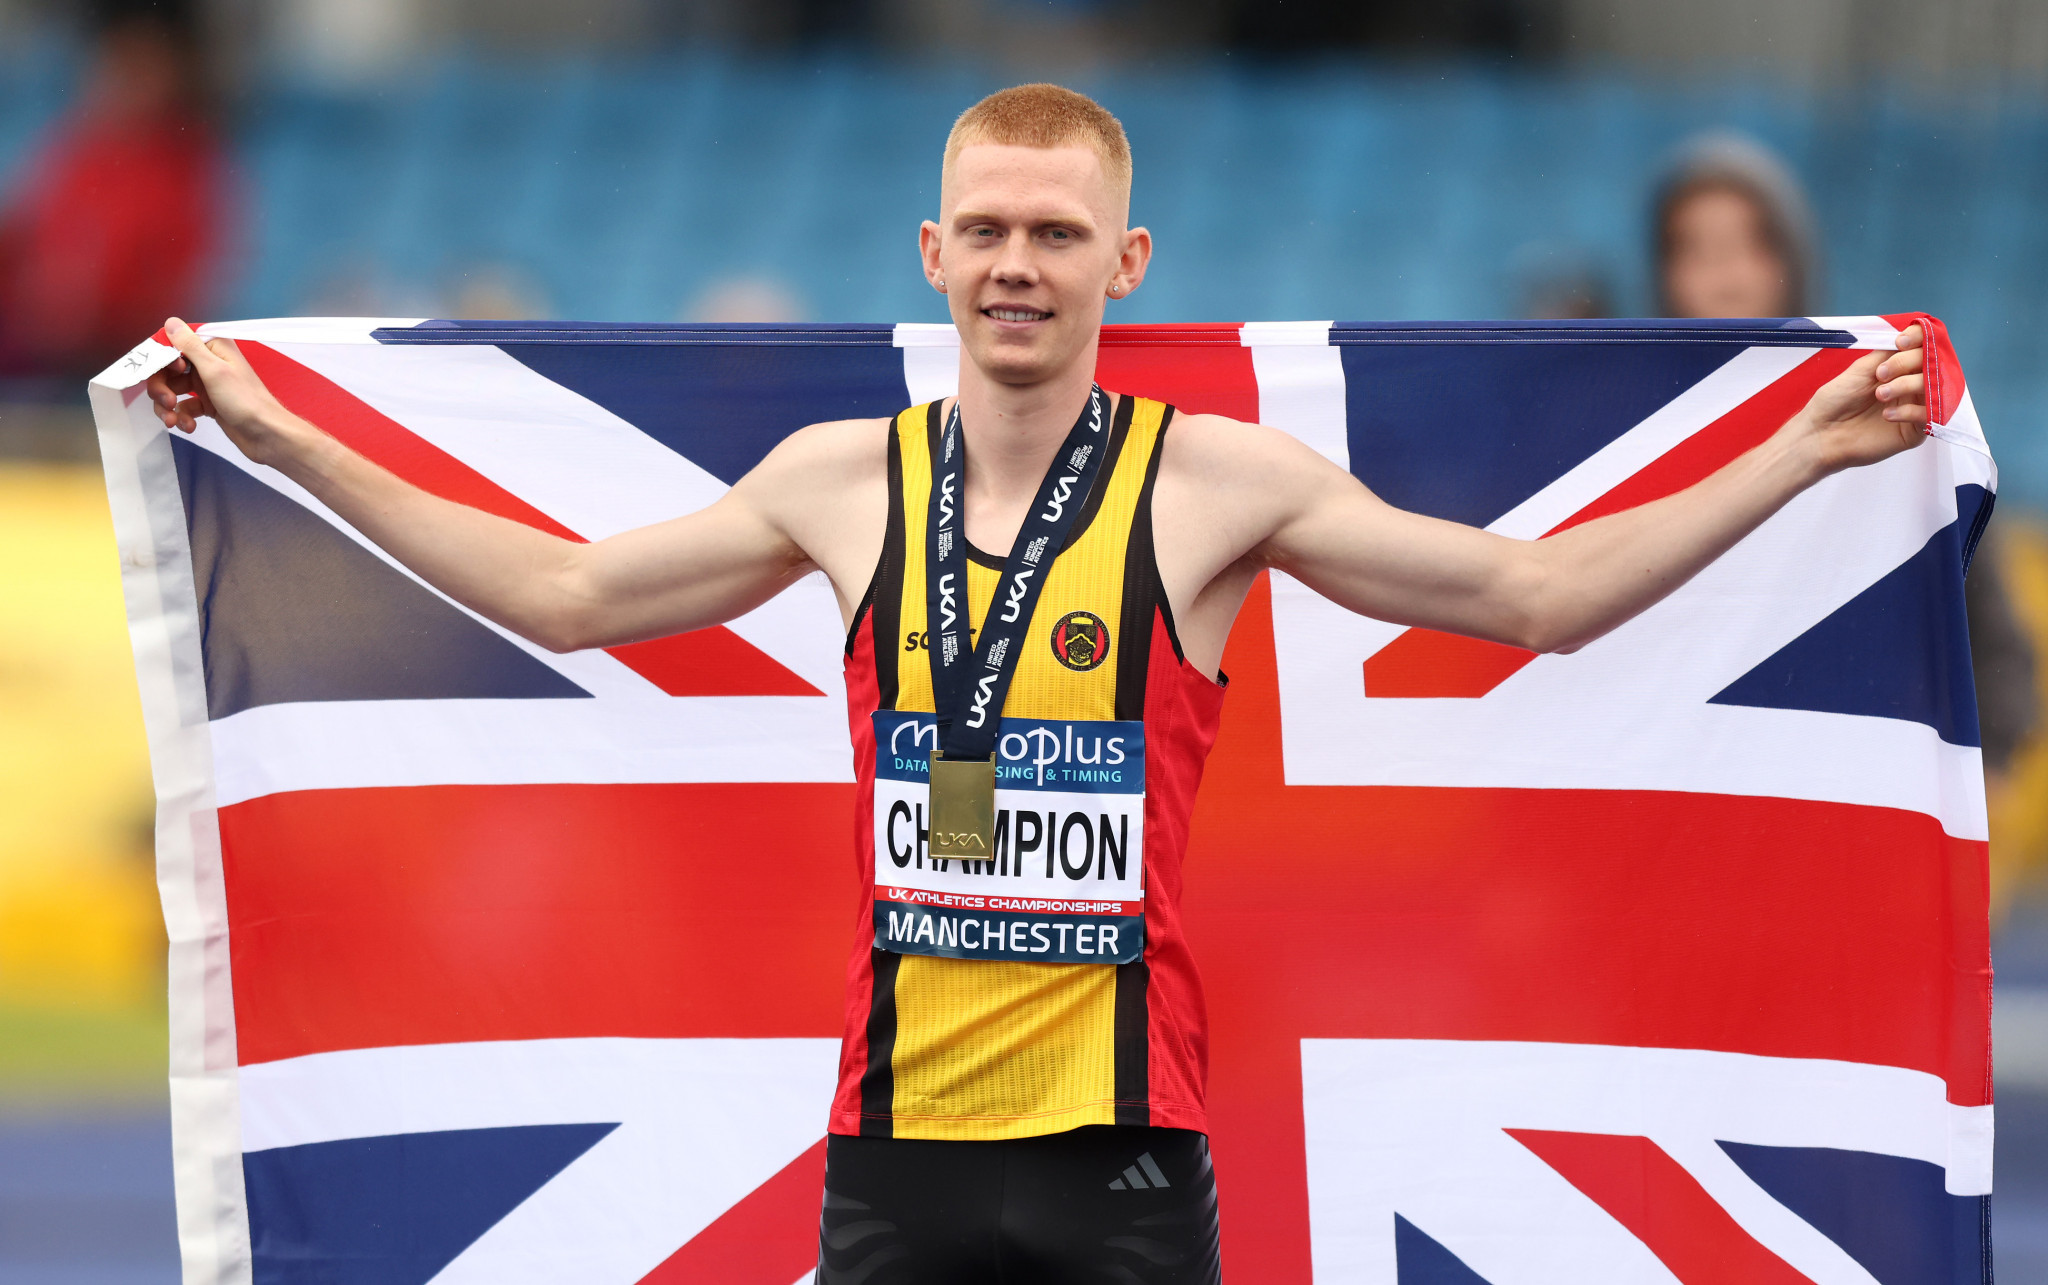 Ben Pattison seized victory in the men's 800m race in Manchester. GETTY IMAGES